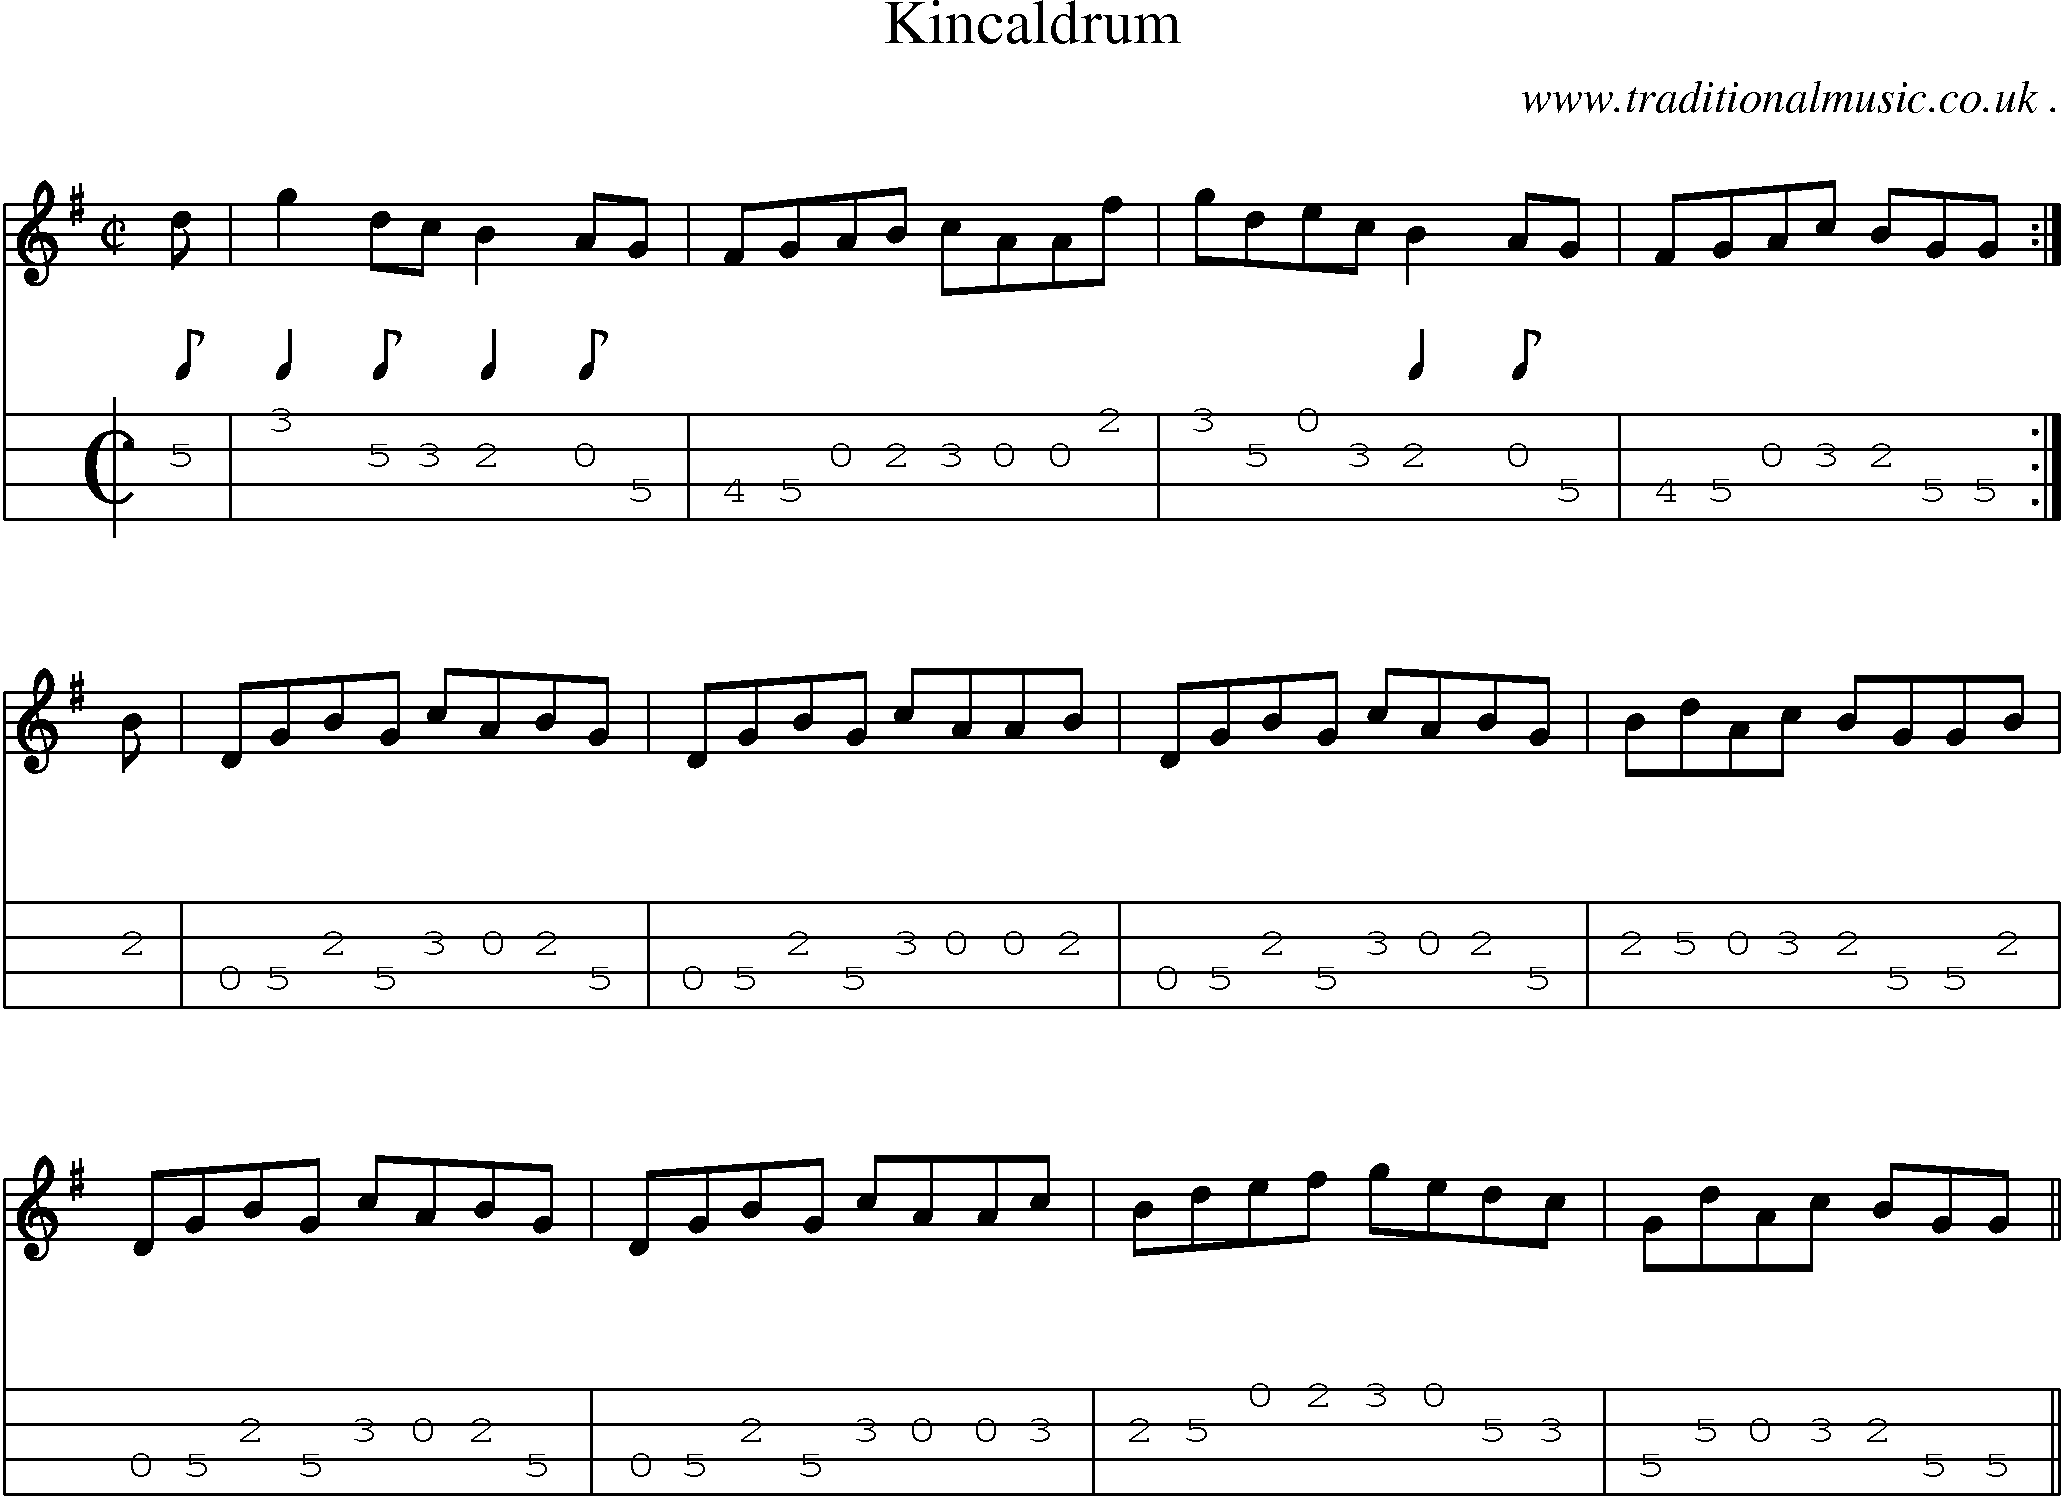 Sheet-music  score, Chords and Mandolin Tabs for Kincaldrum